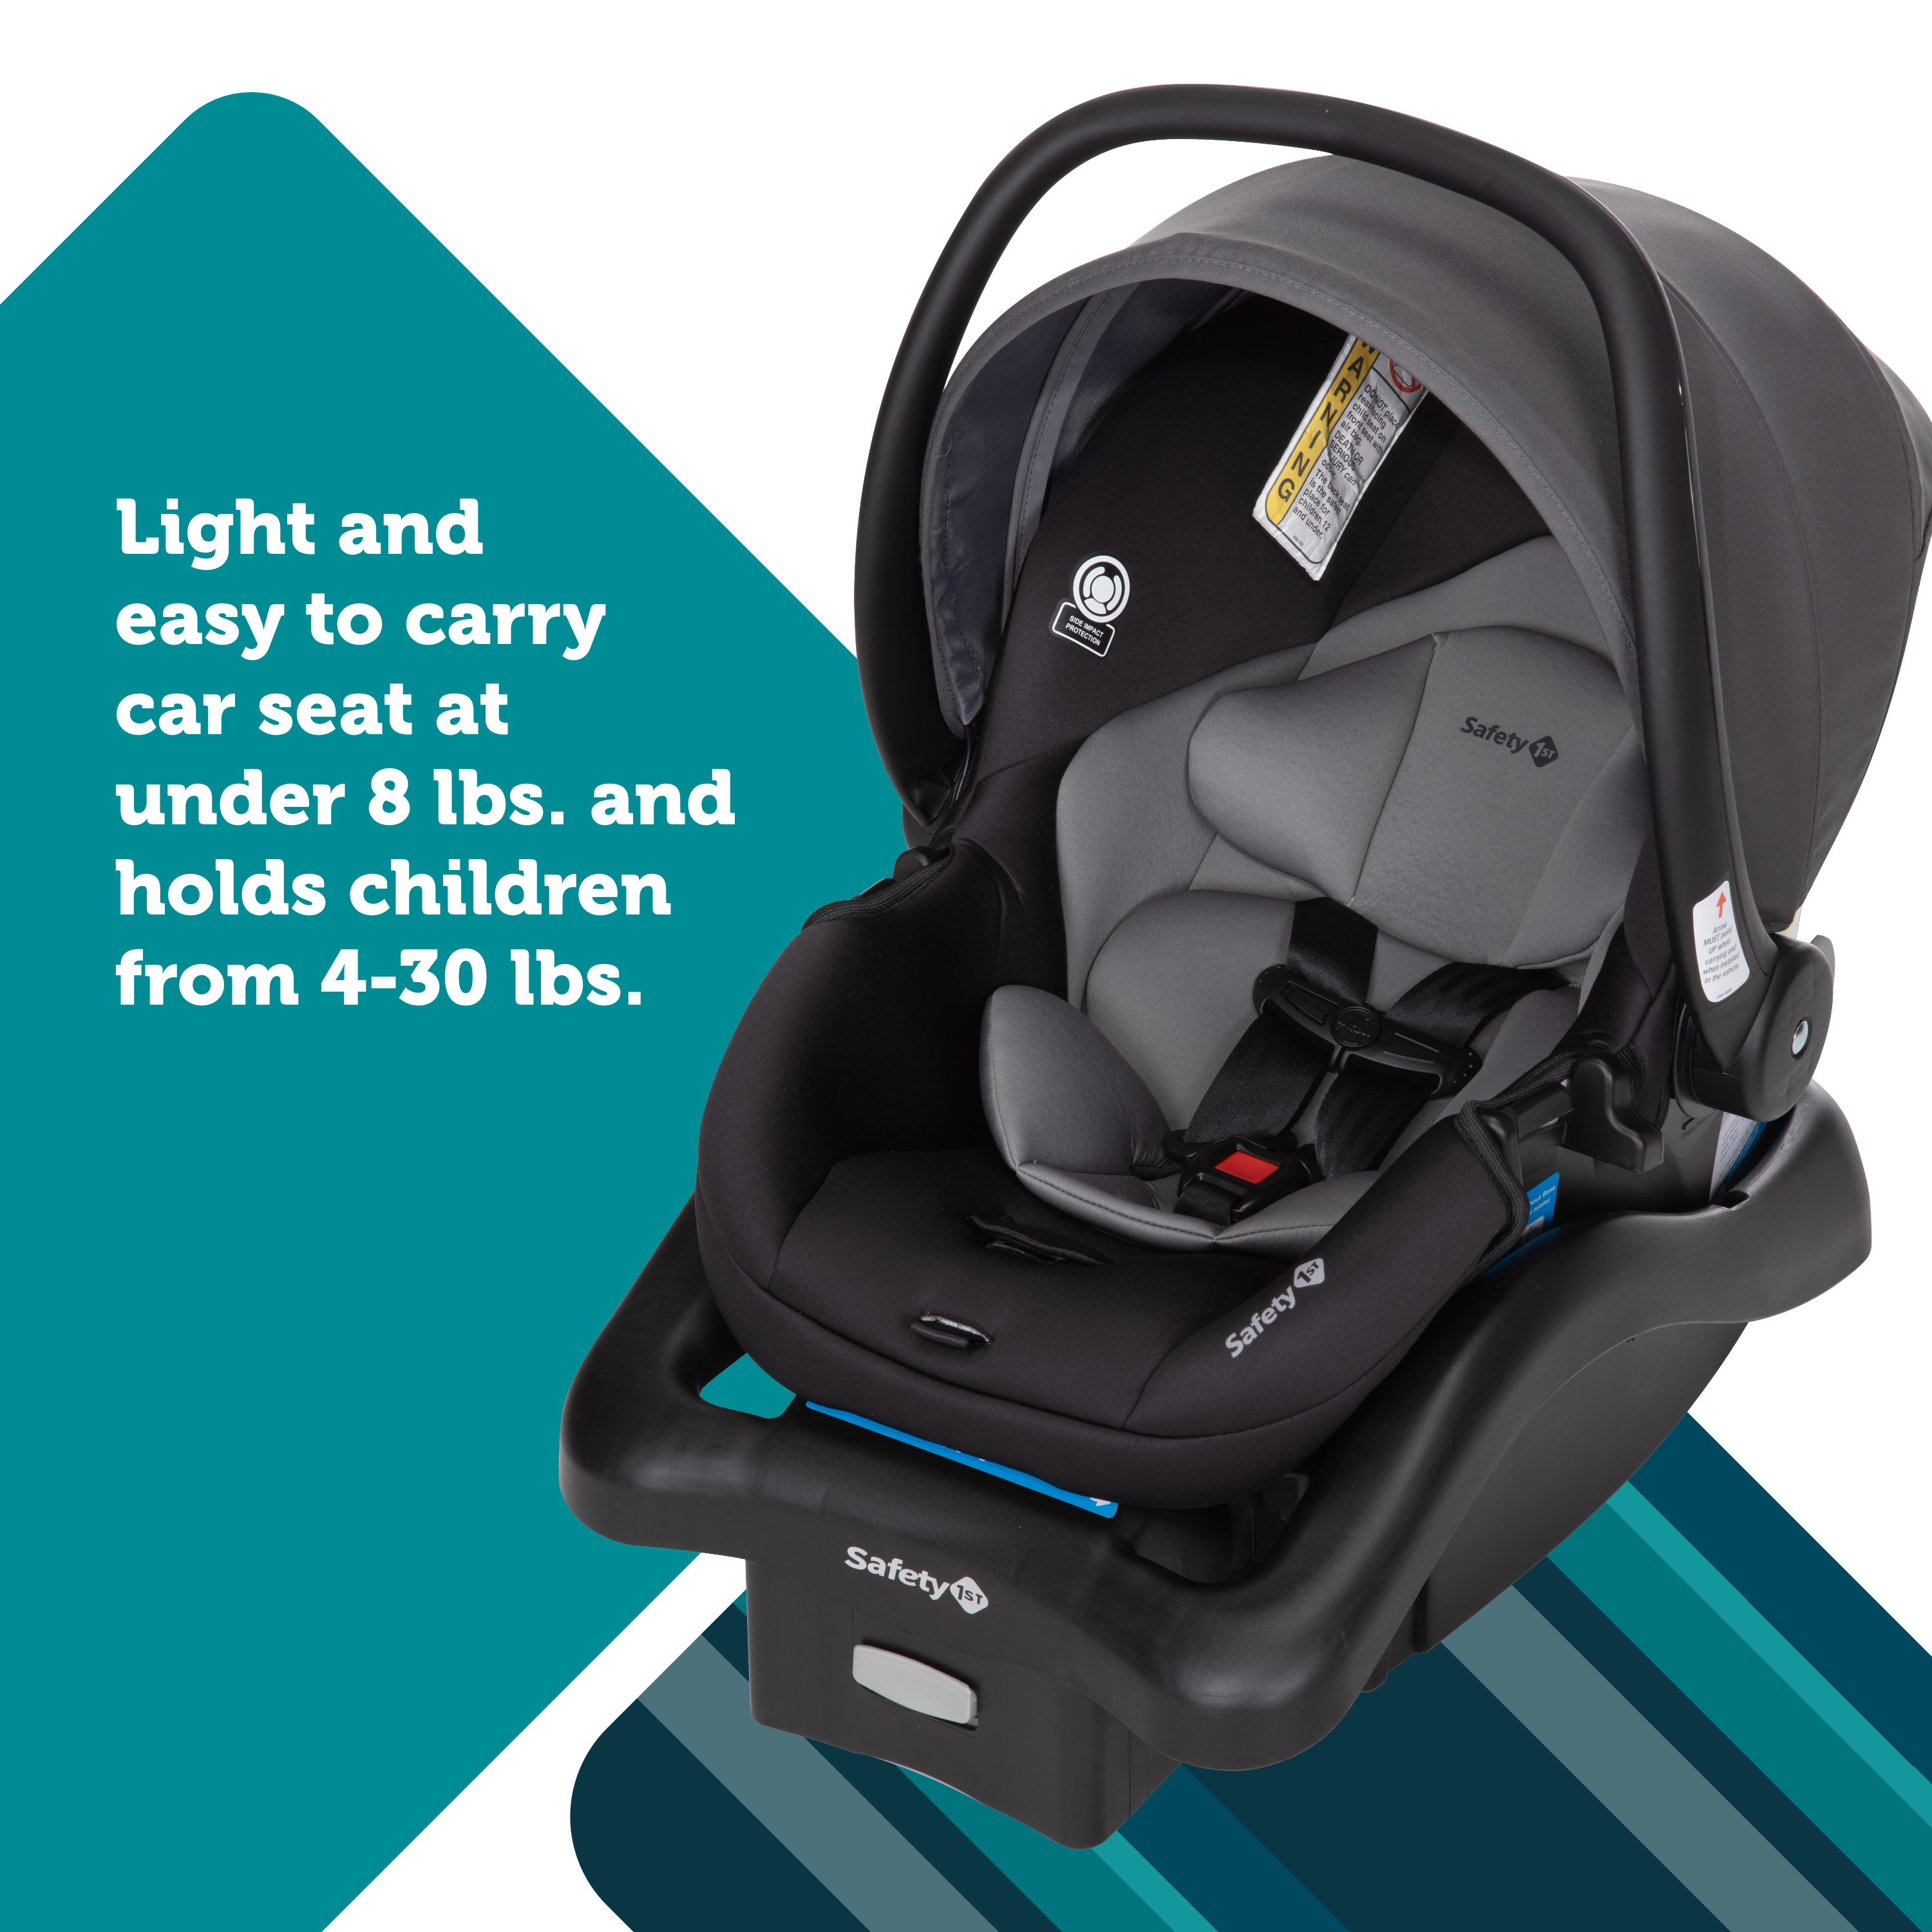 Smooth Ride Travel System - light and easy to carry car seat at under 8 lbs. and holds children from 4-30 lbs.